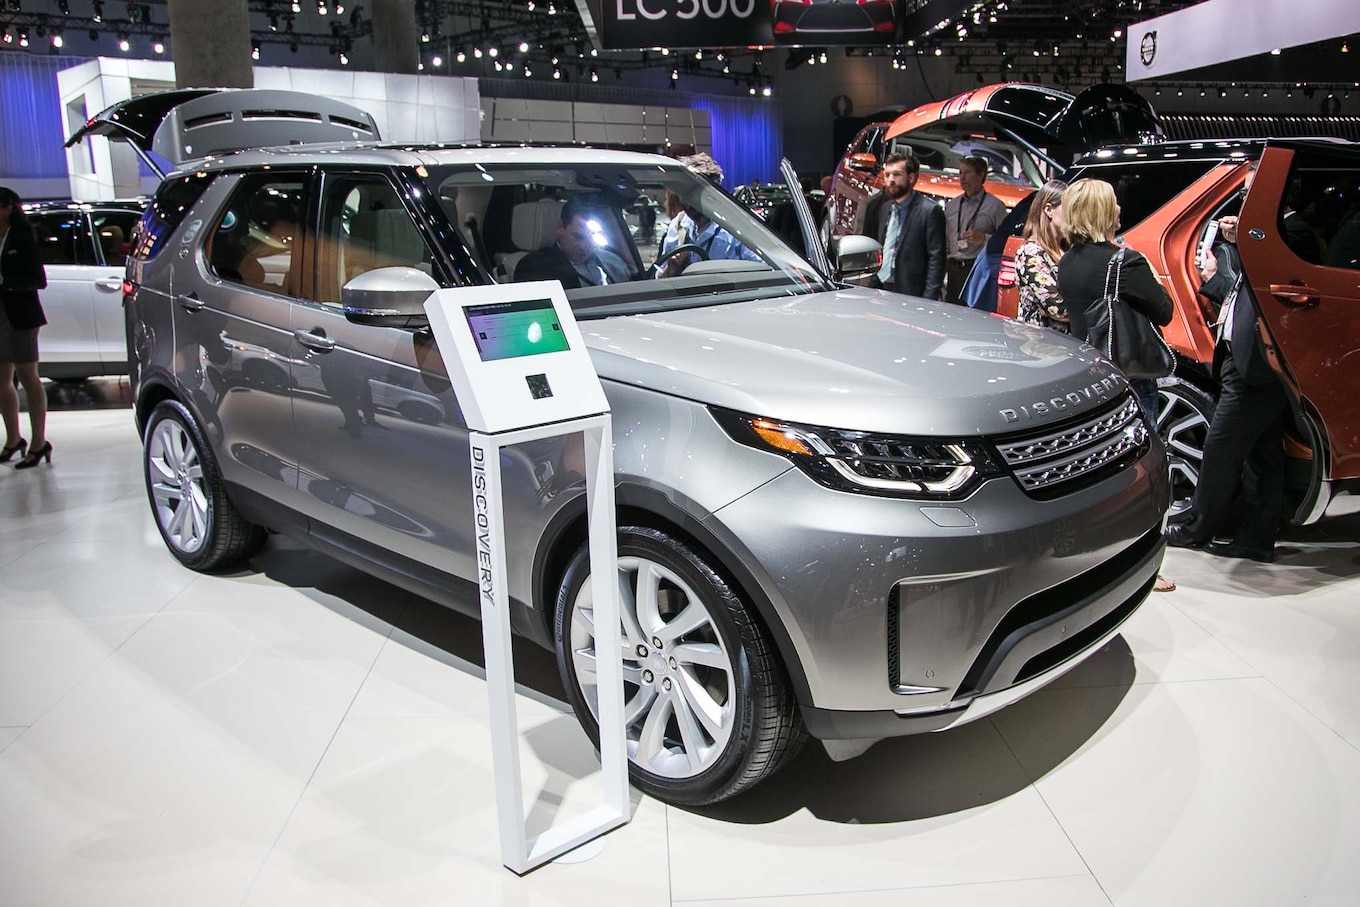 2017 Land Rover Discovery front three quarters